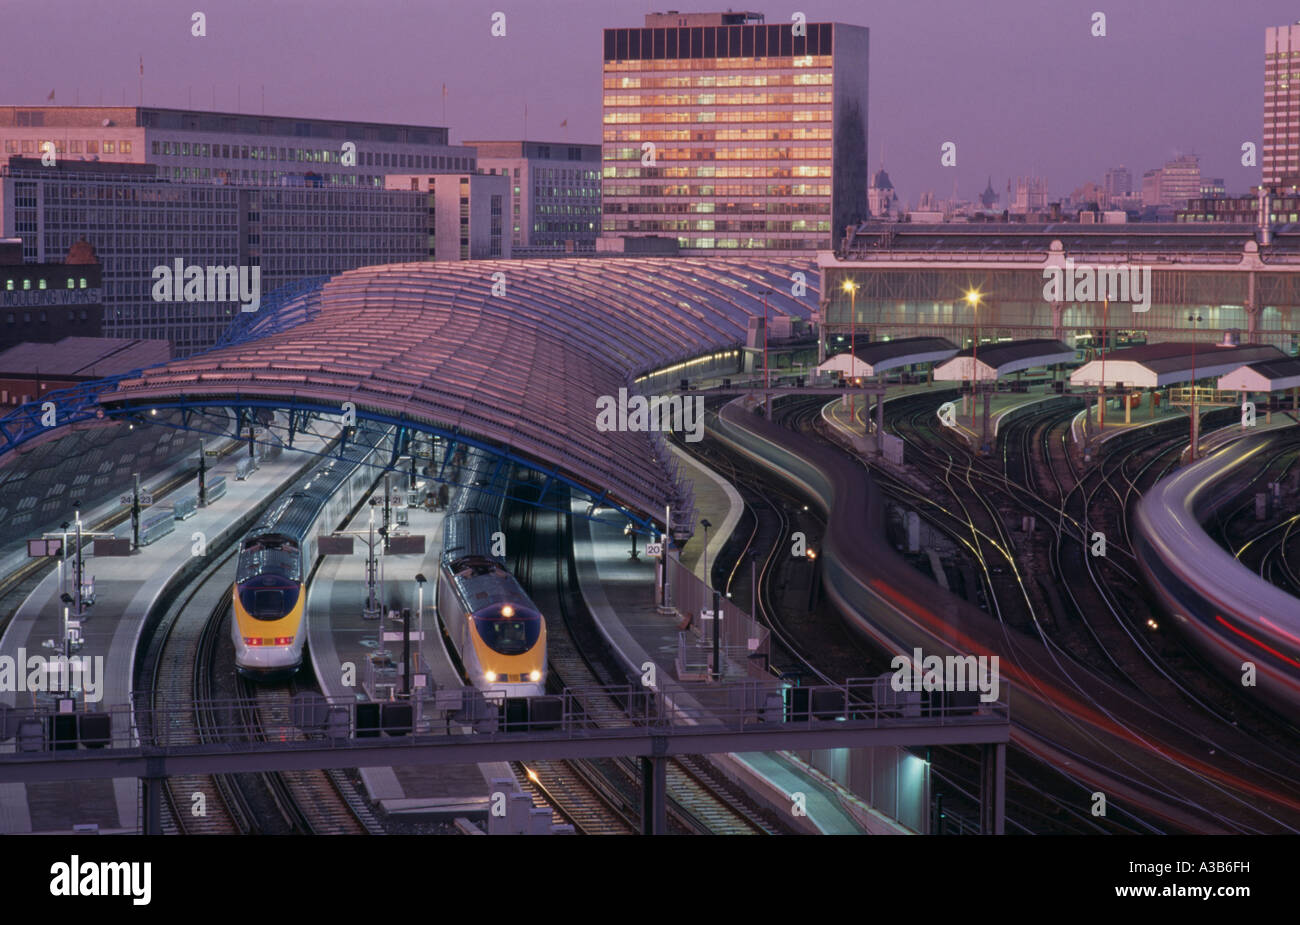 ENGLAND London Waterloo Station International Terminal with Eurostar cross channel trains at platforms with buildings beyond Stock Photo